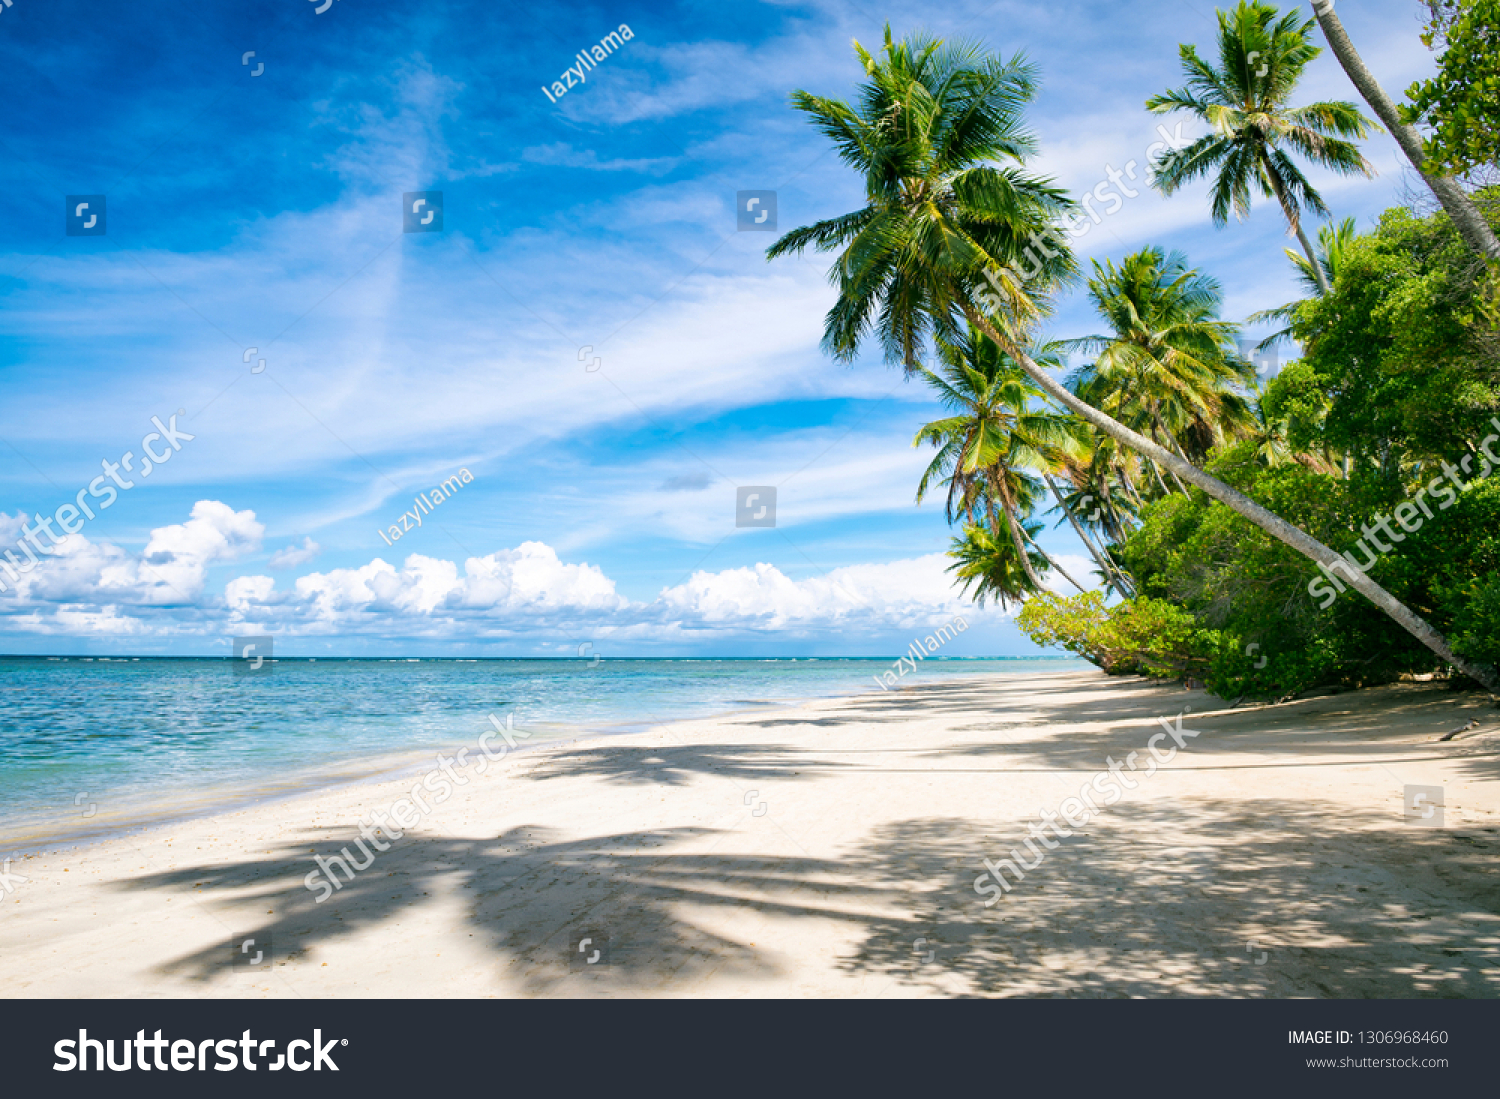 Palm Trees Casting Shadows On Wide Stock Photo 1306968460 | Shutterstock